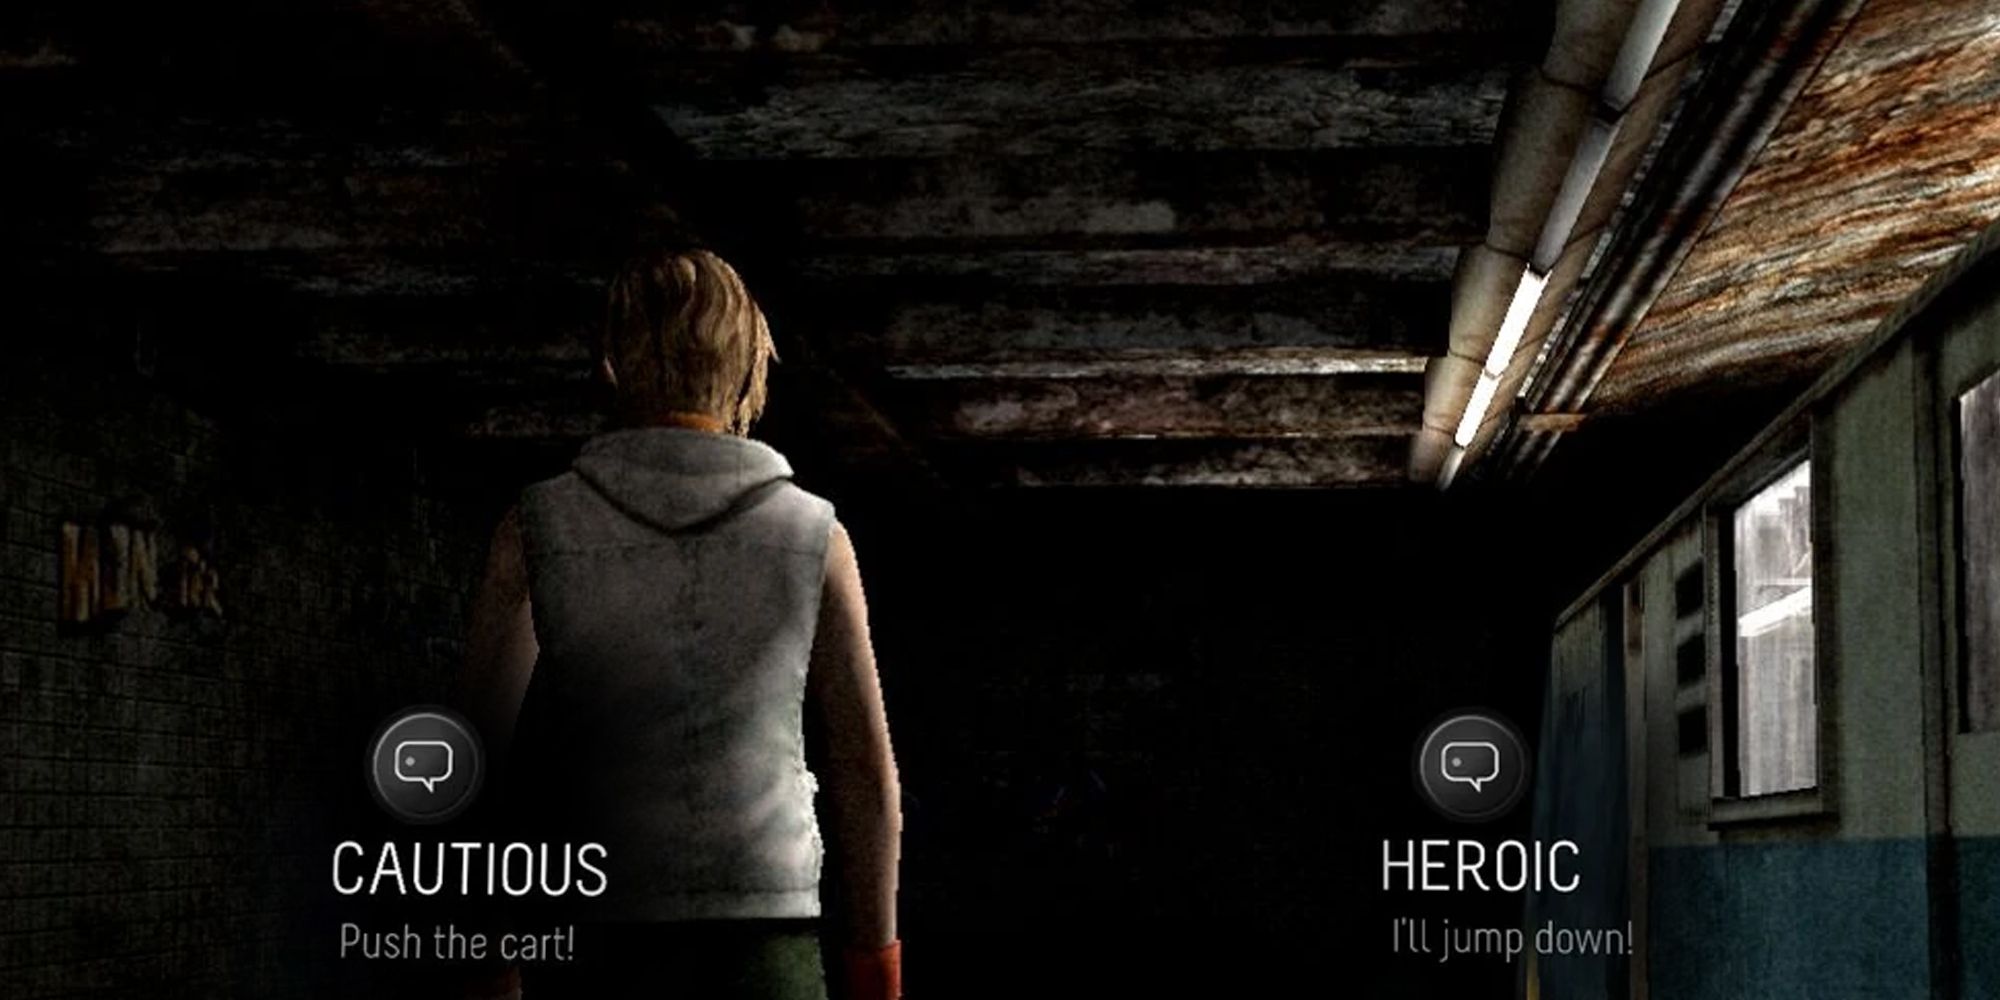 Silent Hill 2 Remake Dev Is Done With Psychological Horror—Good